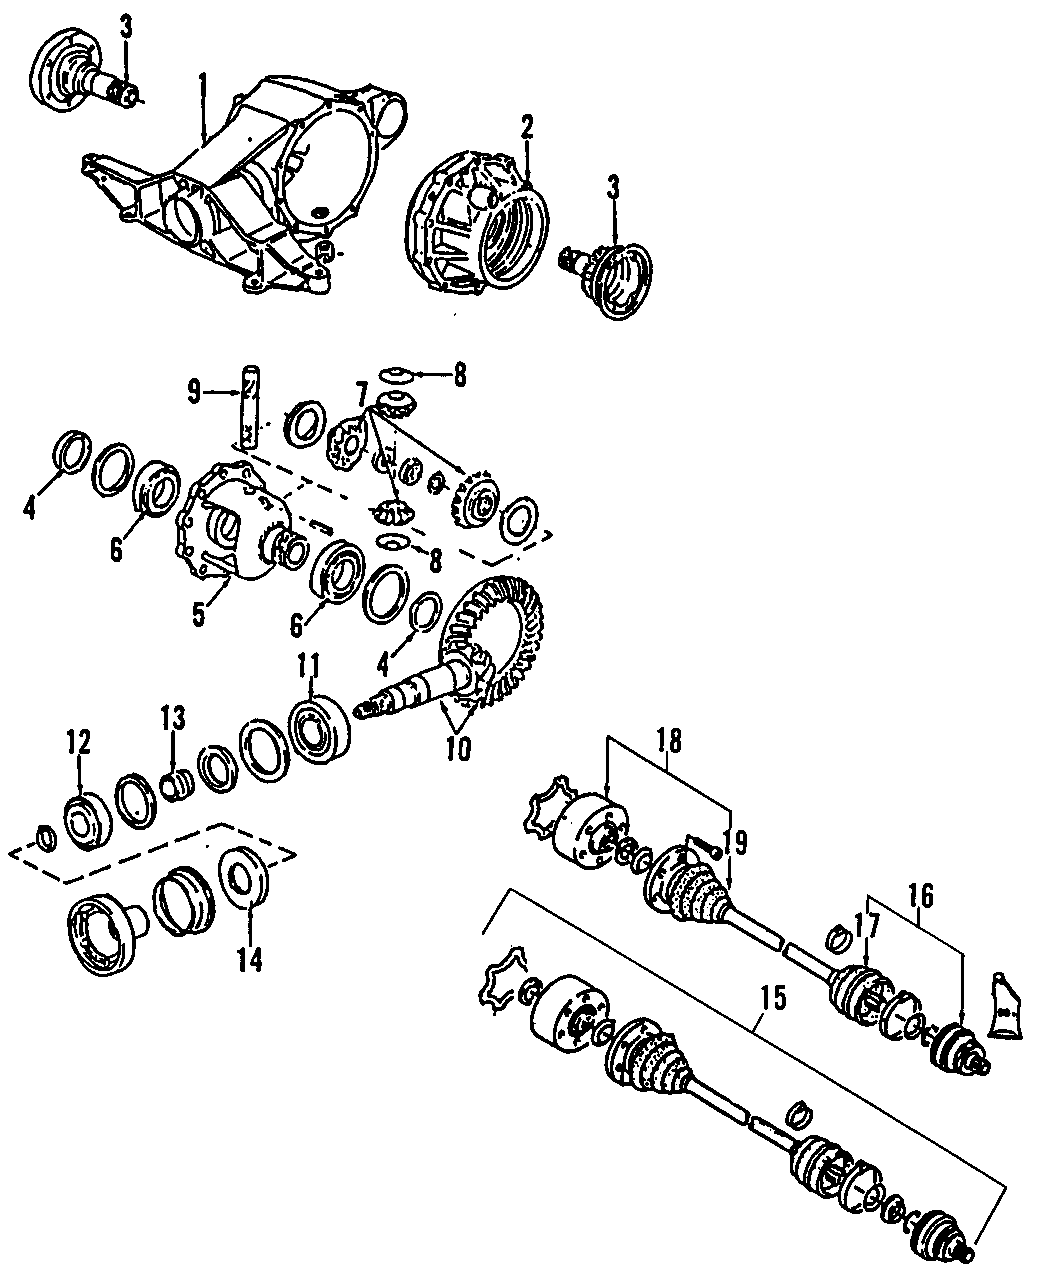 4DRIVE AXLES. REAR AXLE. AXLE SHAFTS & JOINTS. DIFFERENTIAL. PROPELLER SHAFT.https://images.simplepart.com/images/parts/motor/fullsize/F257120.png